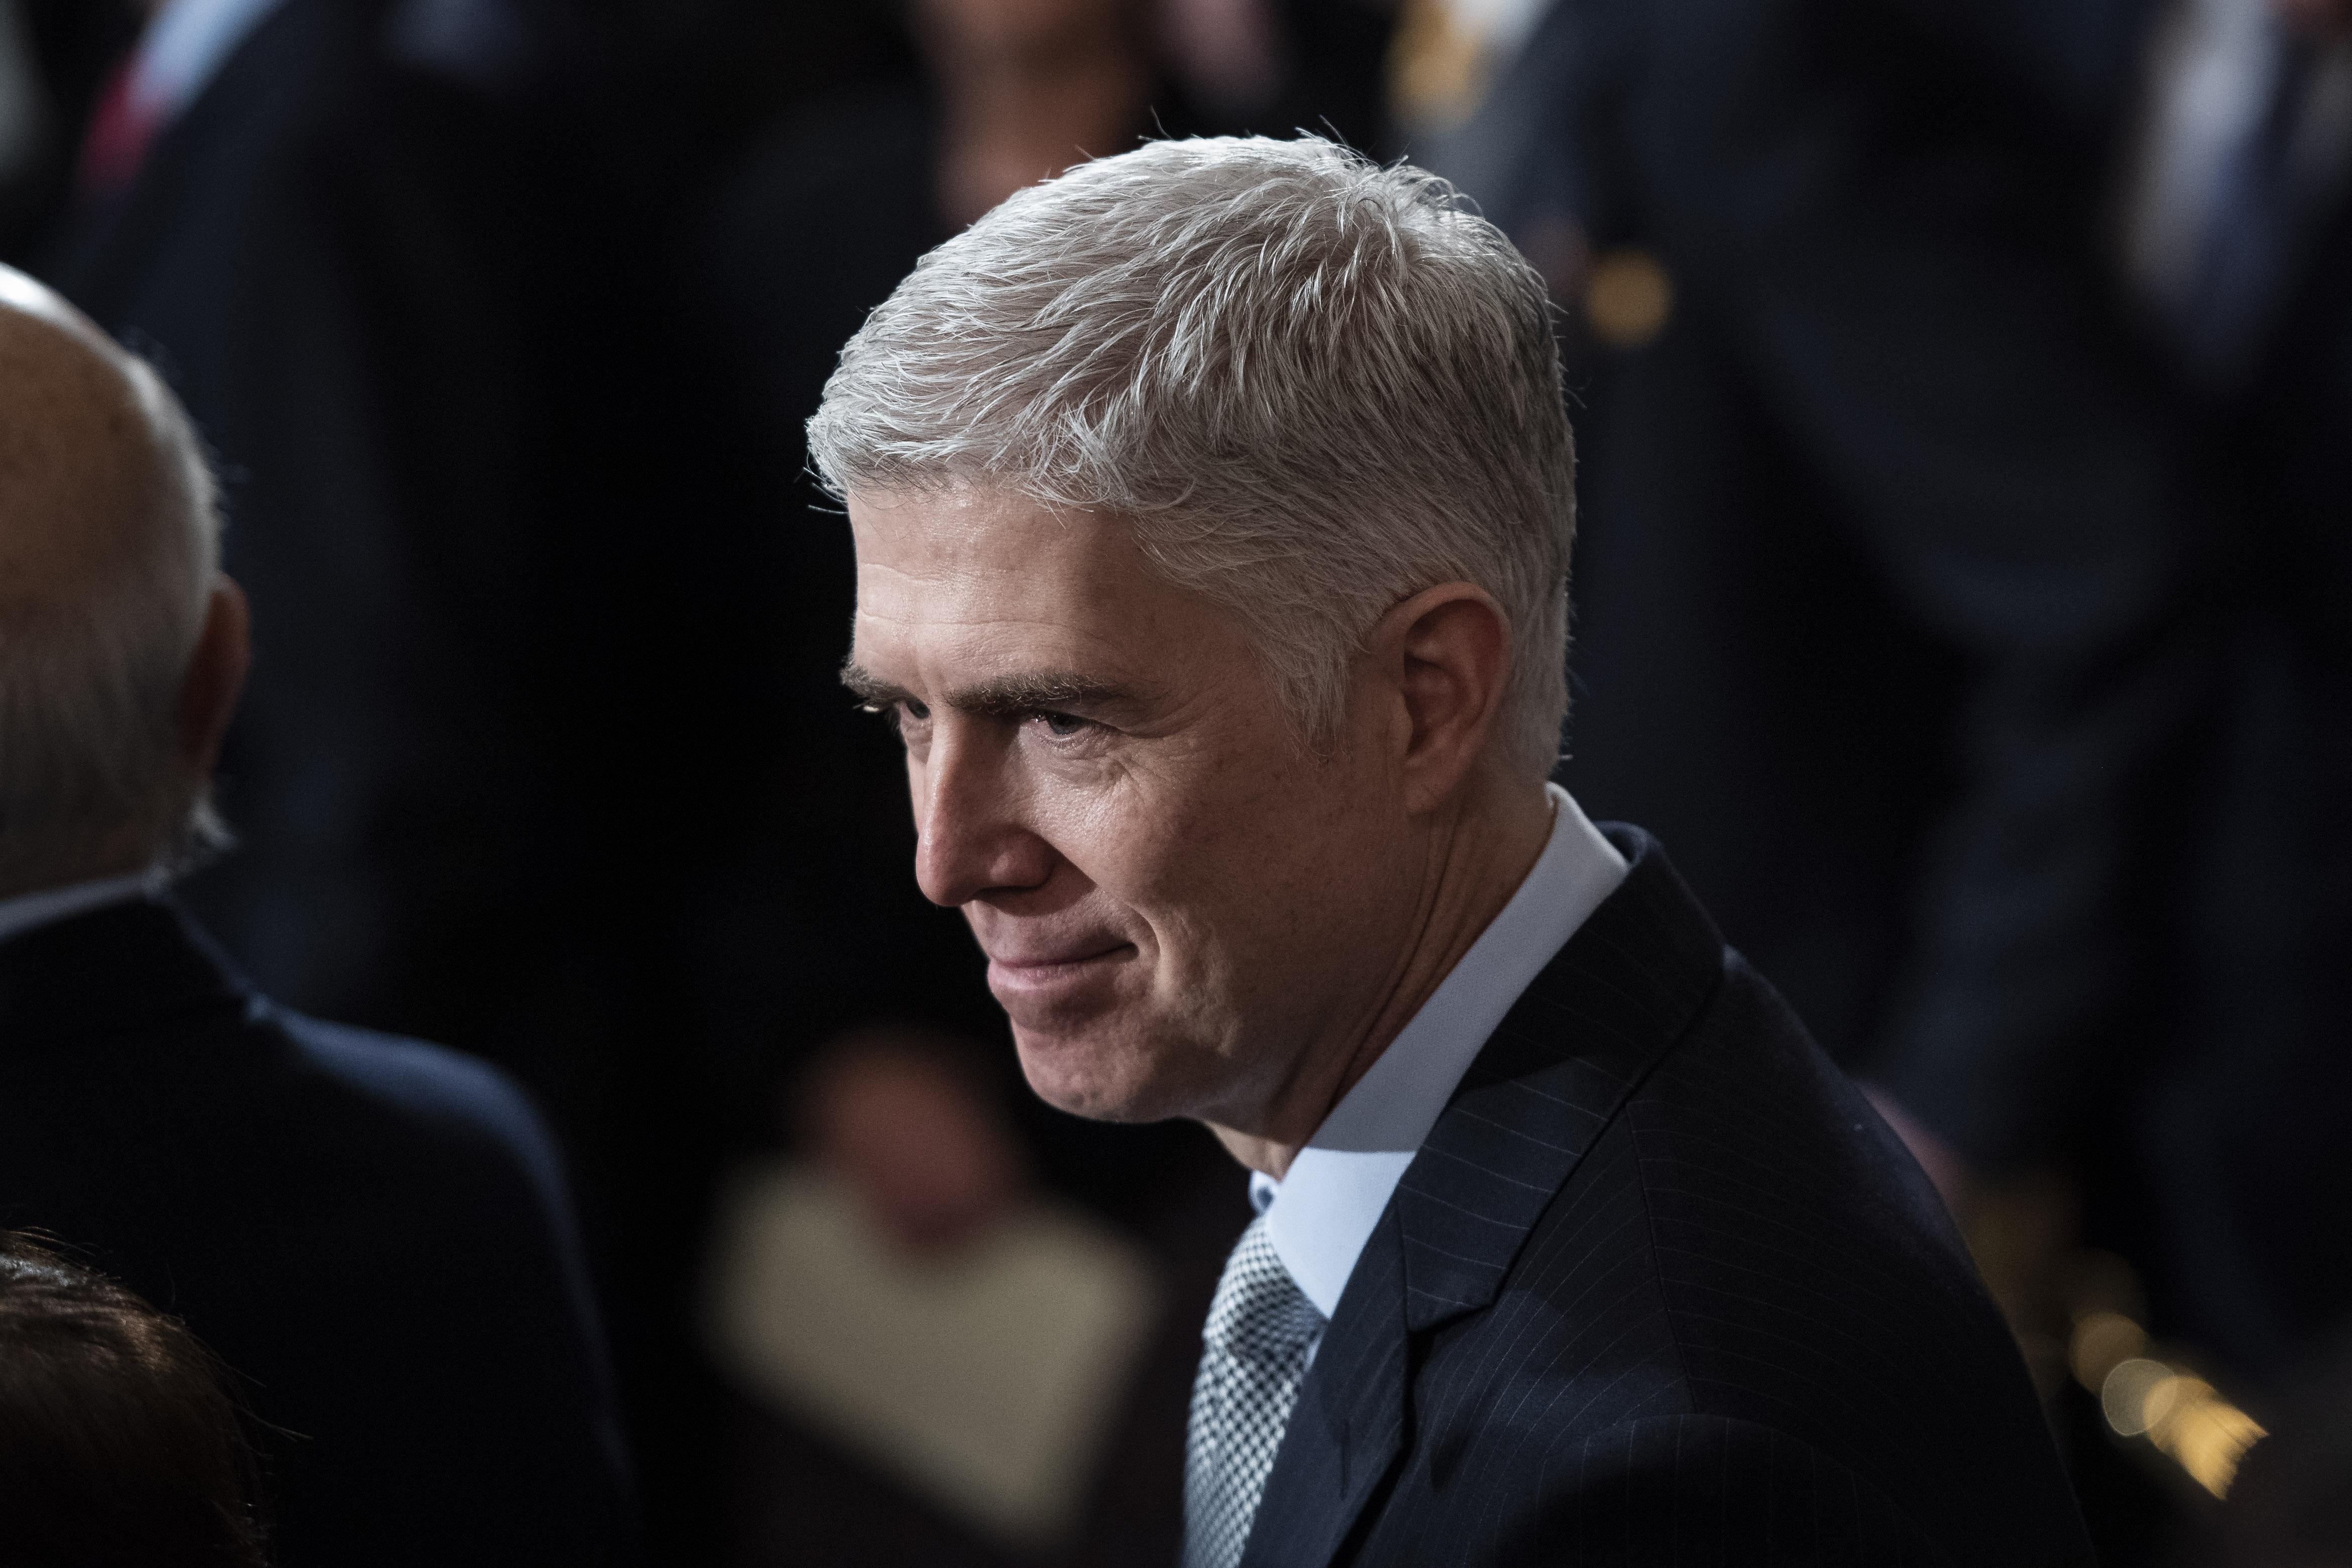 Gorsuch standing in a crowd smiling in a suit